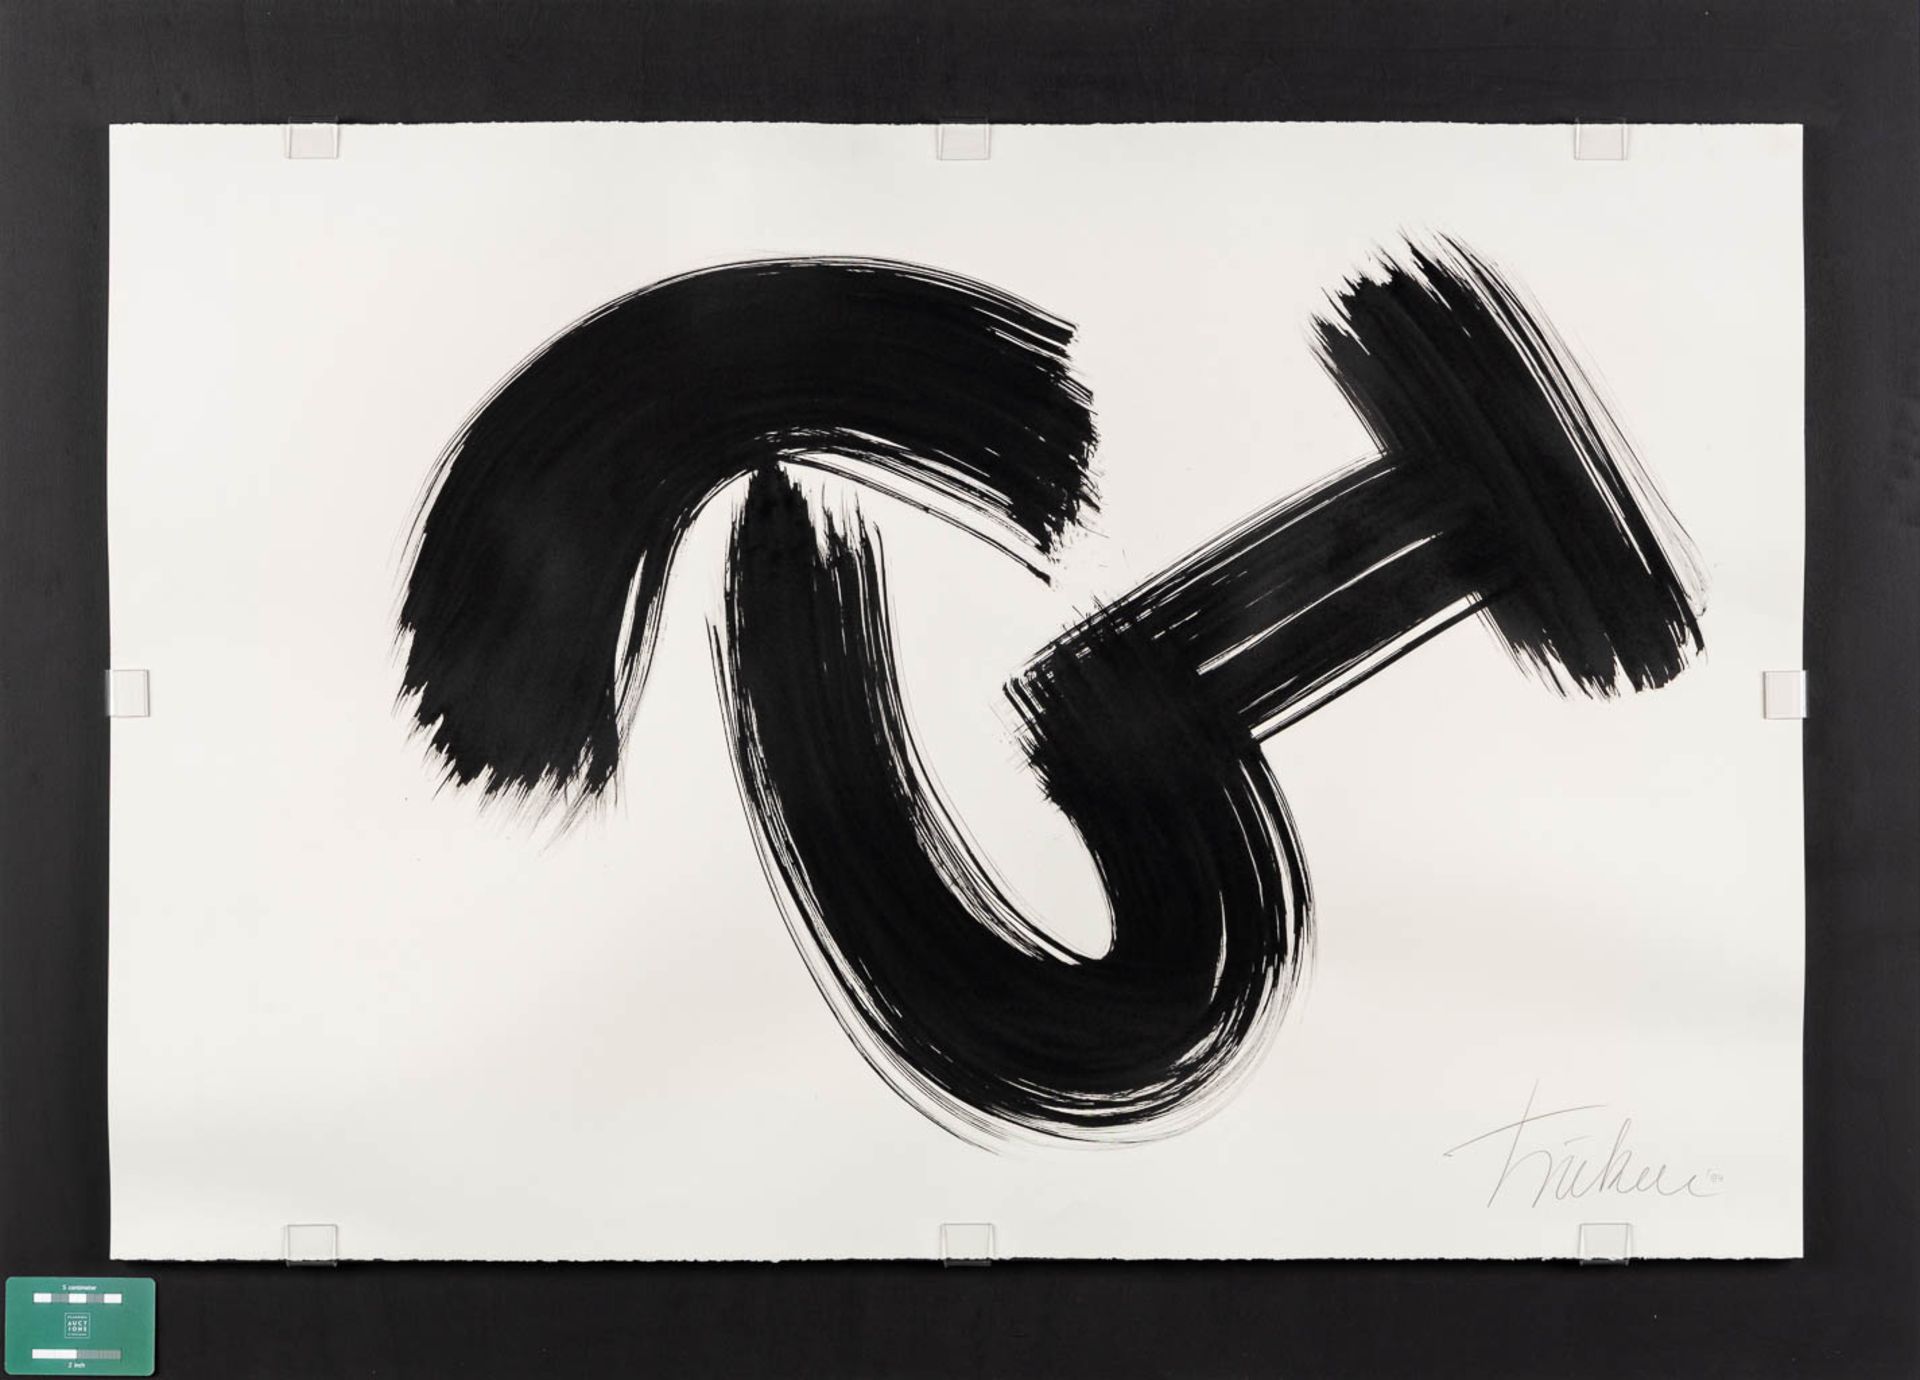 TSUKAI (XX) 'Calligraphy' eastern Indian ink on paper. (W:95 x H:64 cm) - Image 2 of 6